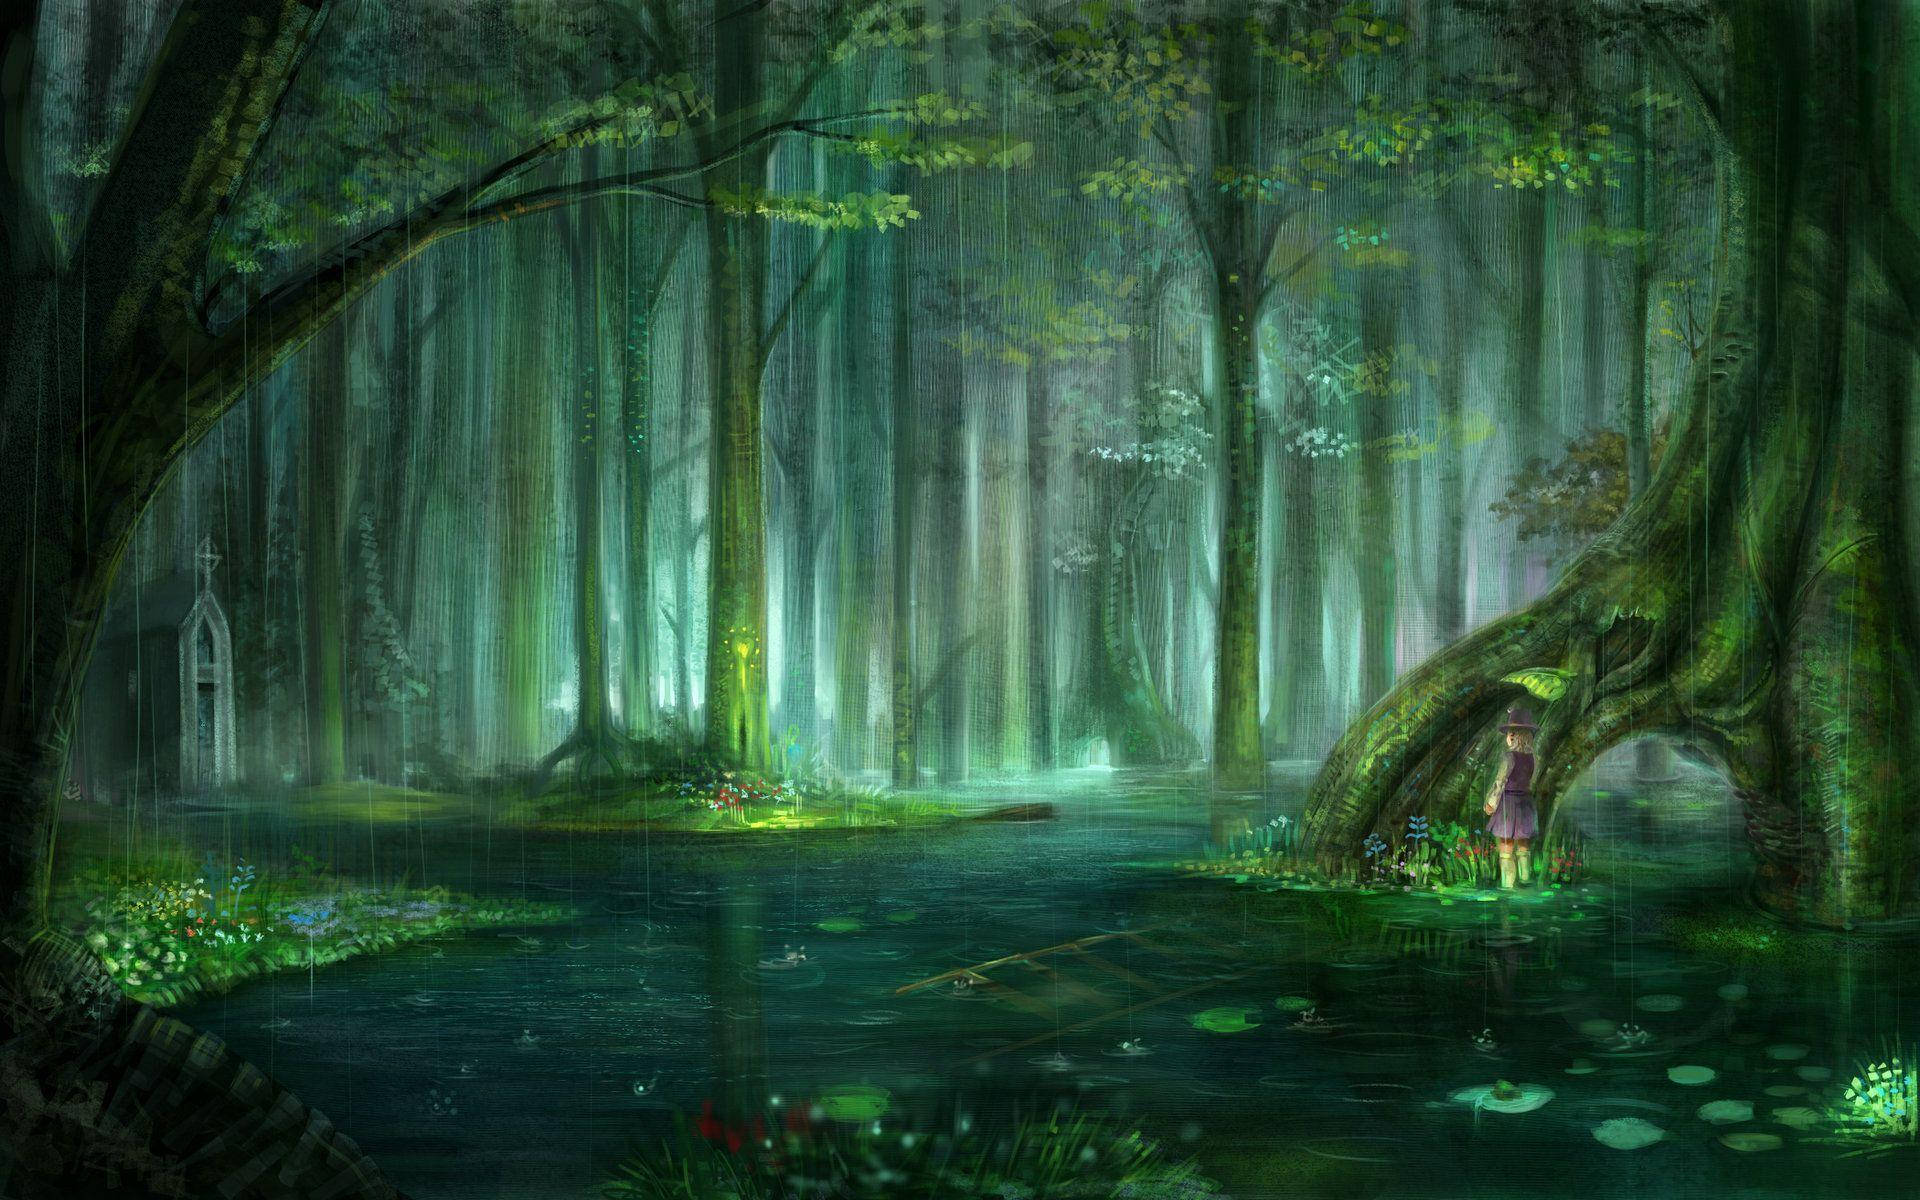 Body Of Water In Enchanted Forest Wallpaper